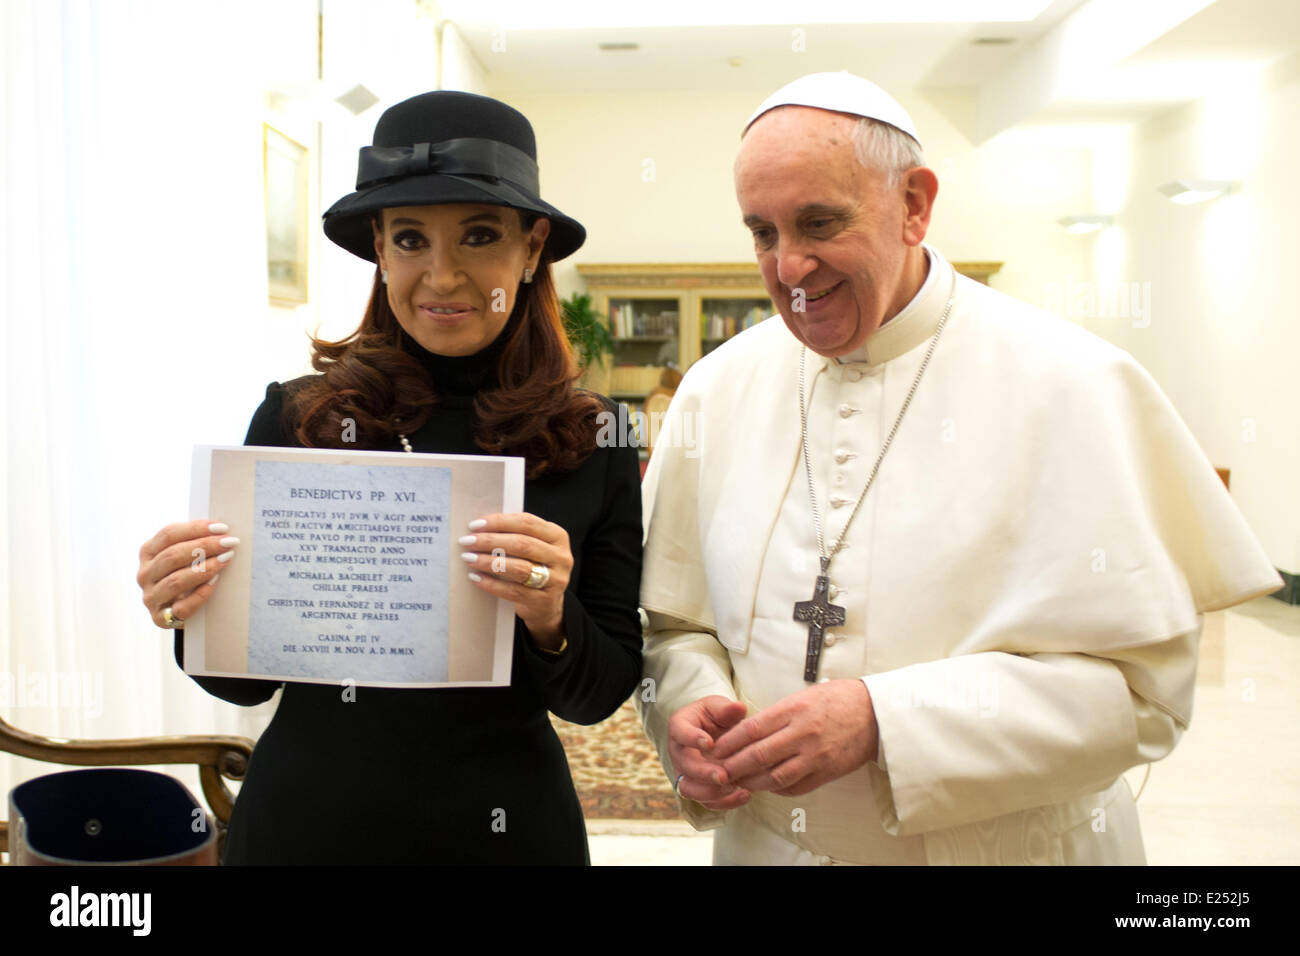 Pope Francis meets compatriot President Cristina Kirchner of Argentina at the Vatican  Featuring: Pope Francis,President Cristina Kirchner Where: Rome, Italy When: 18 Mar 2013 Stock Photo